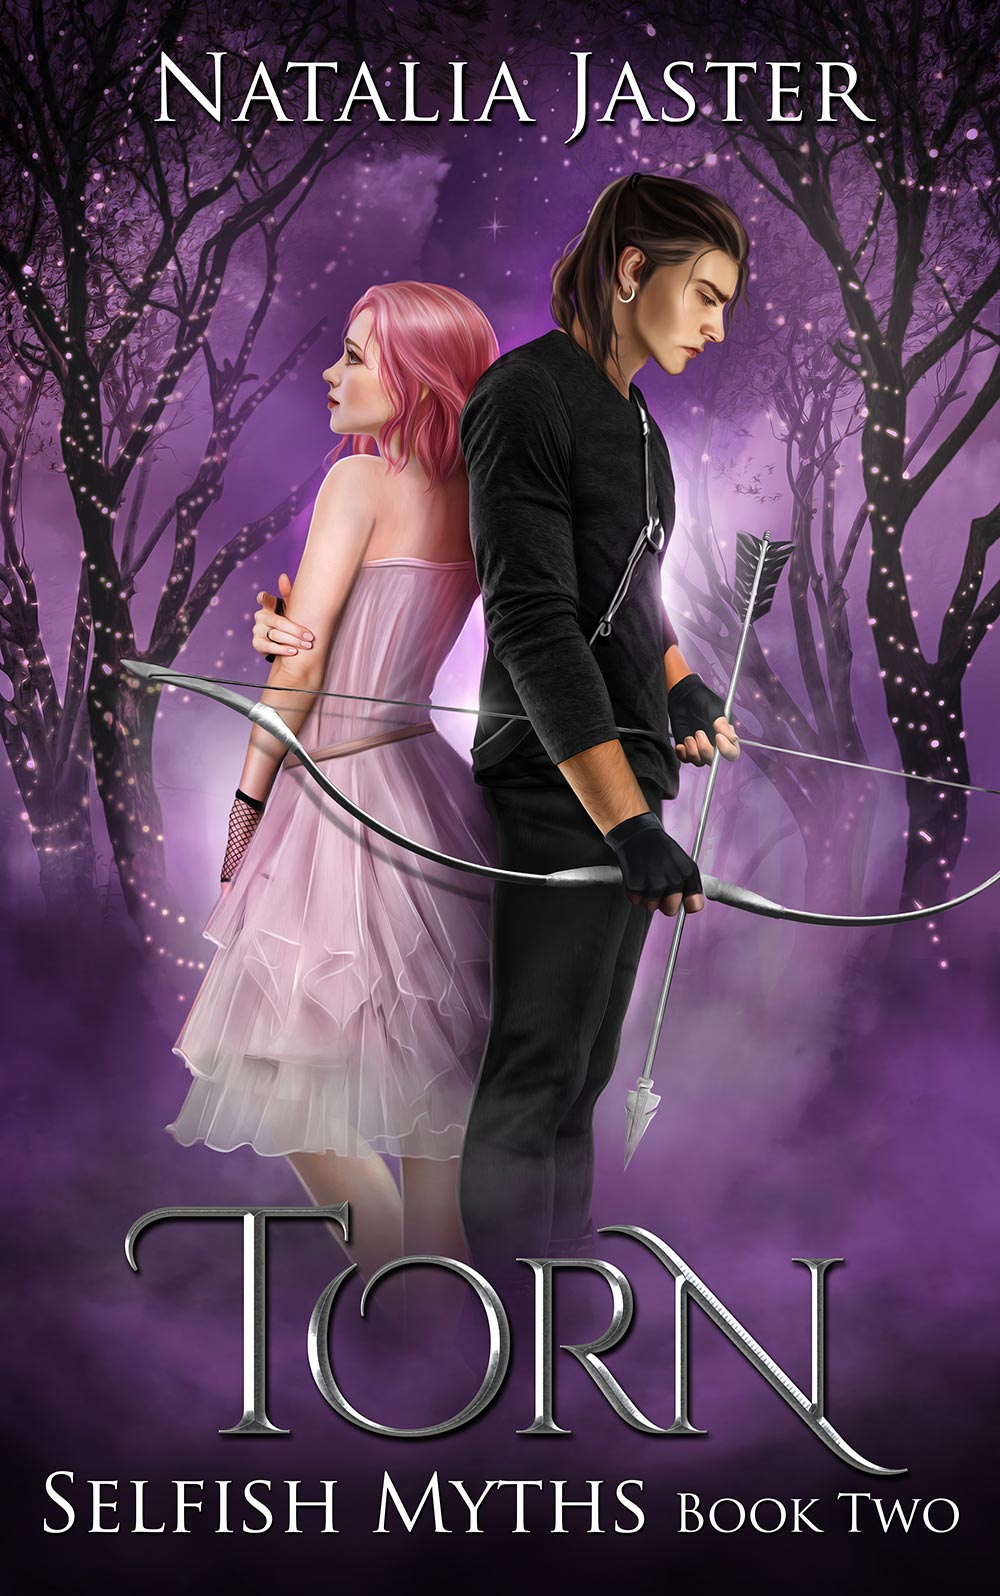 Cover of Torn, a novel by Natalia Jaster